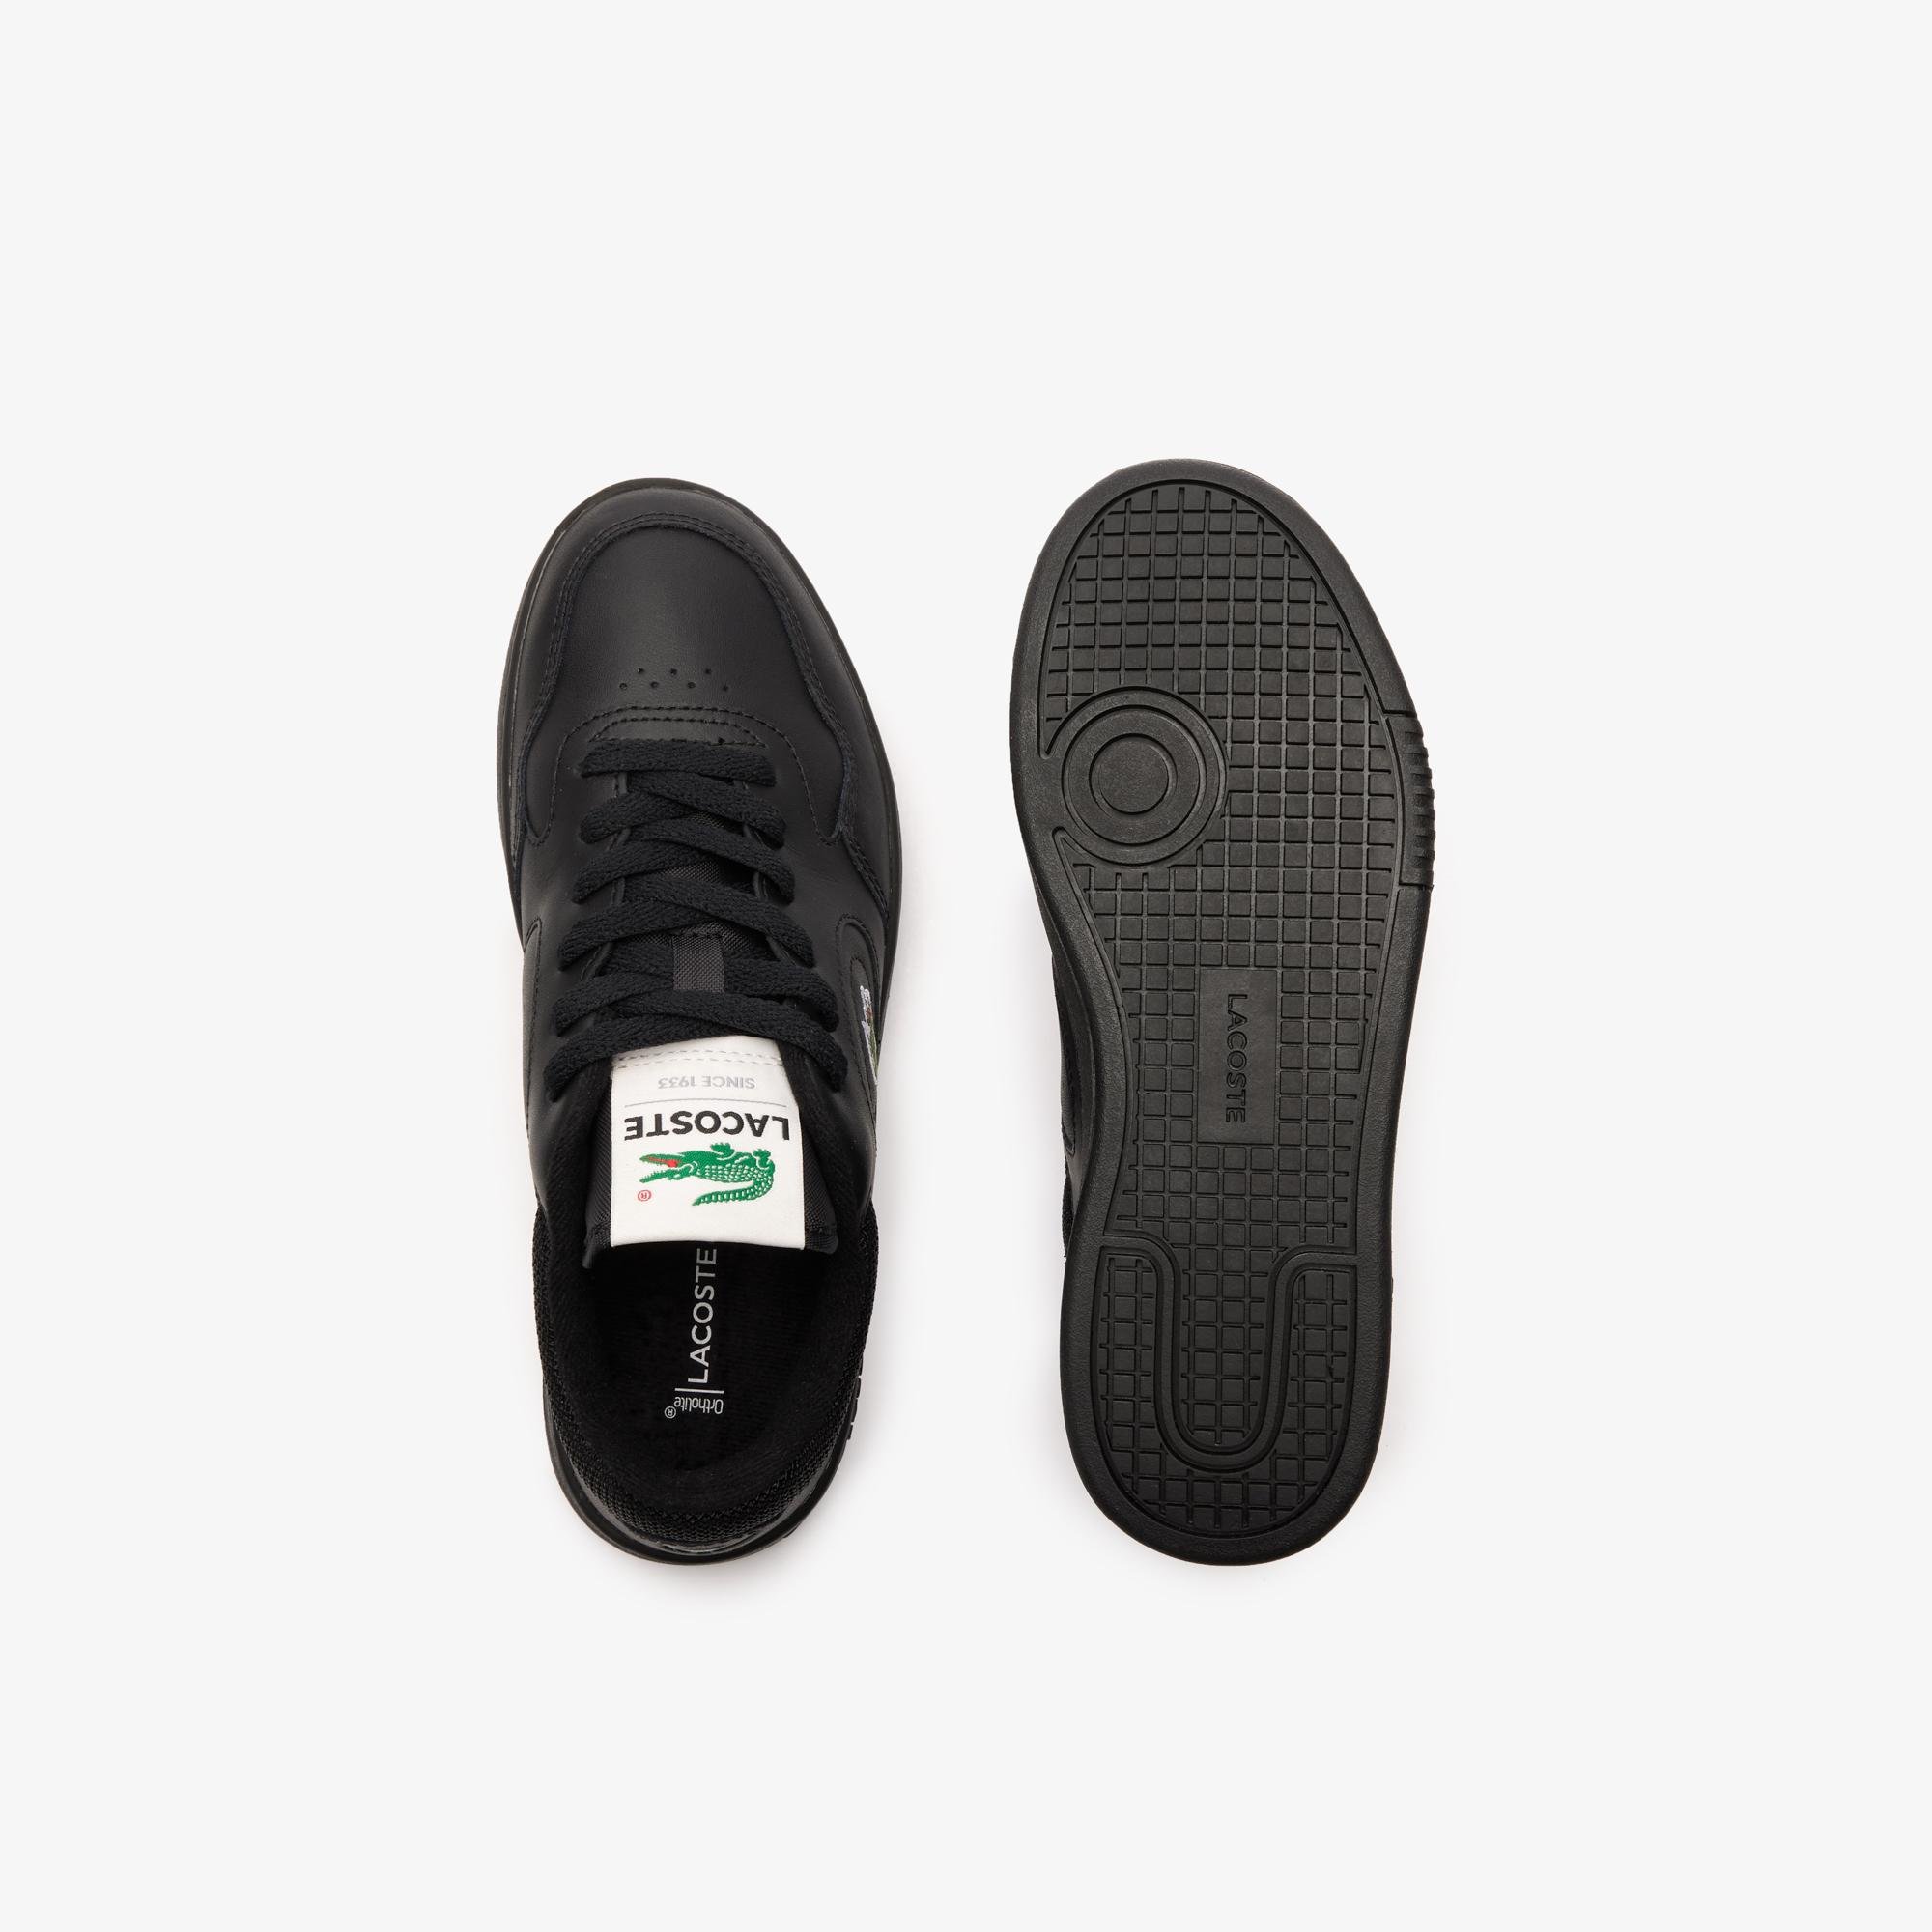 Lacoste Lineset women's white trainers